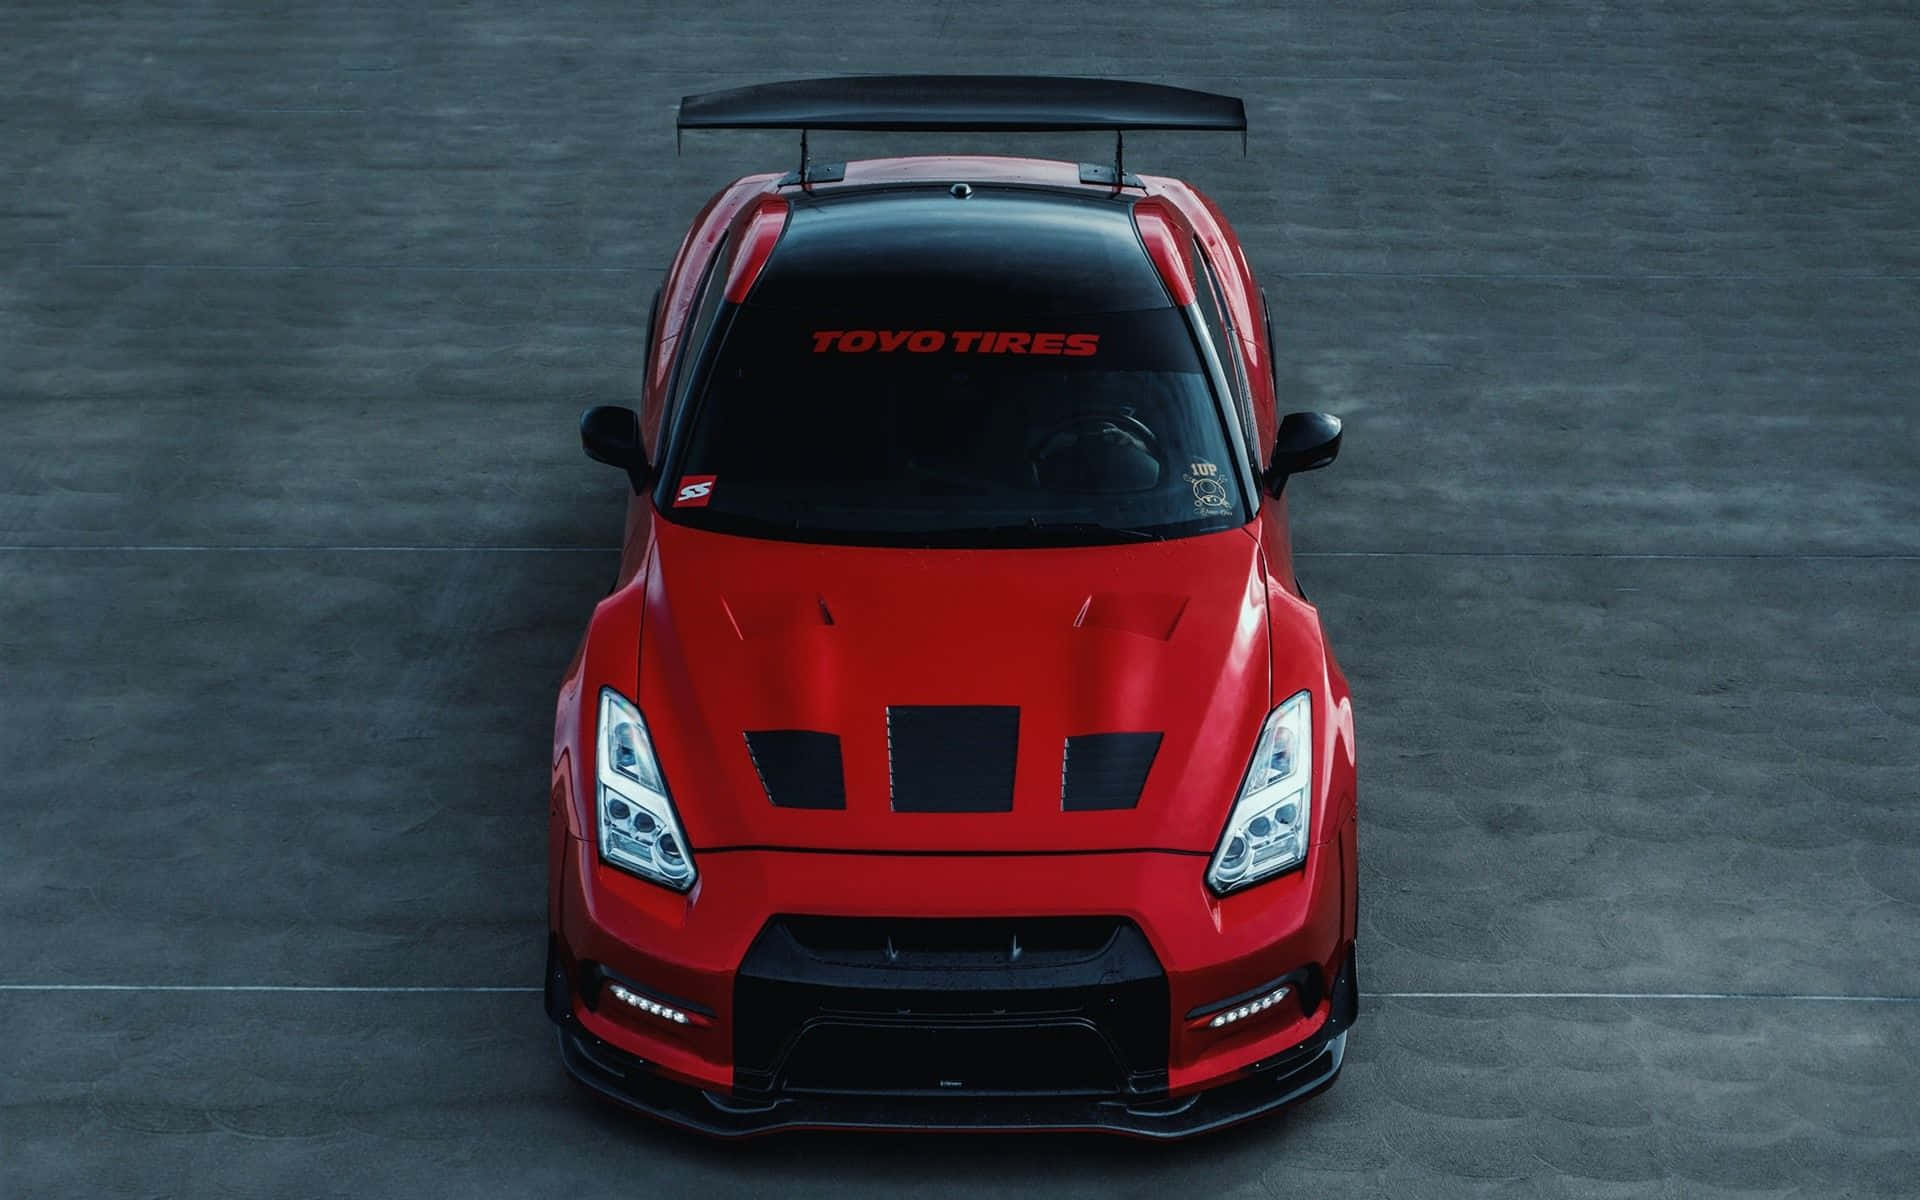 A Red Nissan Gtr - R - Is Shown In The Sky Background